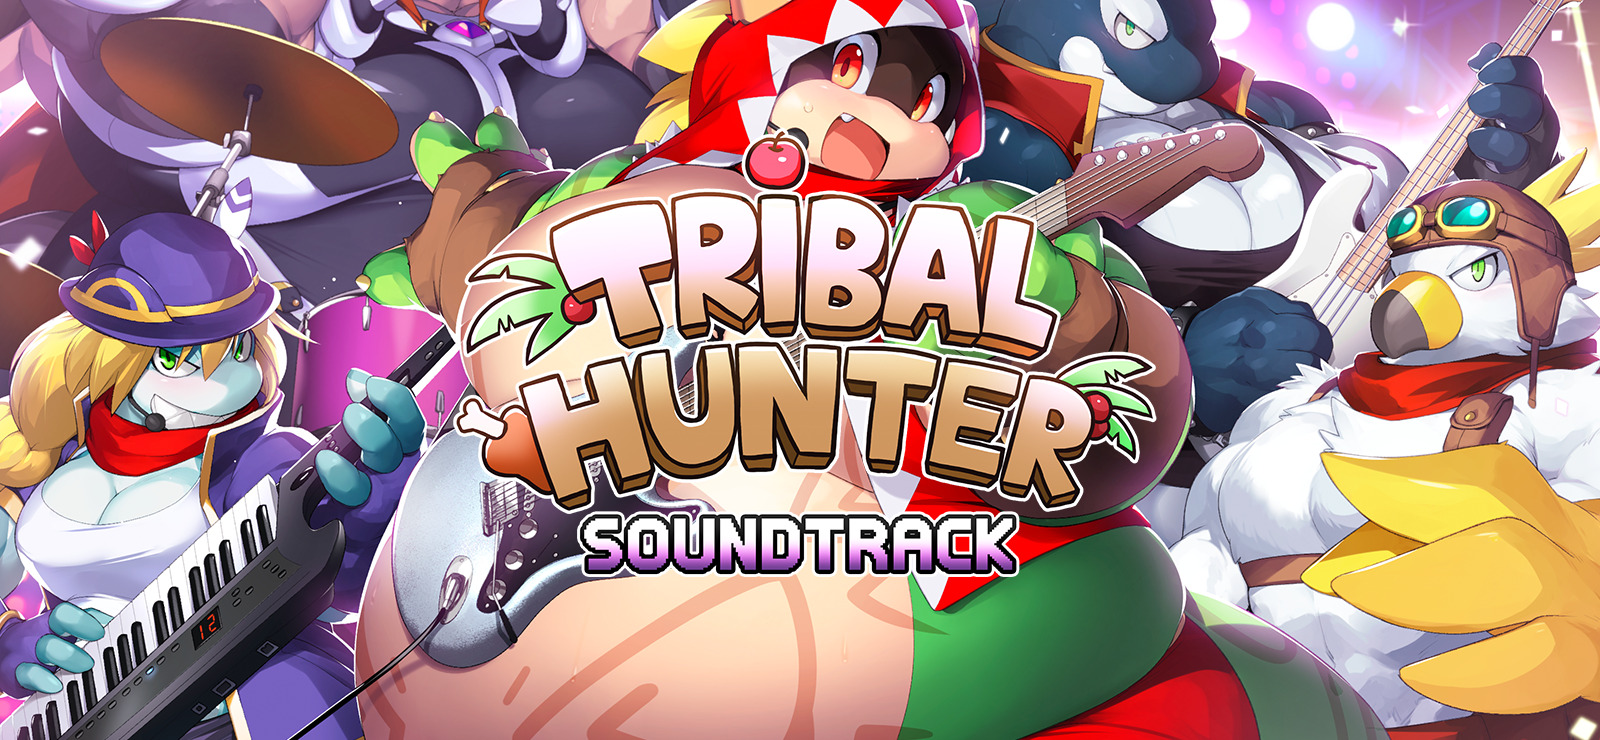 Tribal Hunter game is released! - Tribal Hunter - Weight Gaming